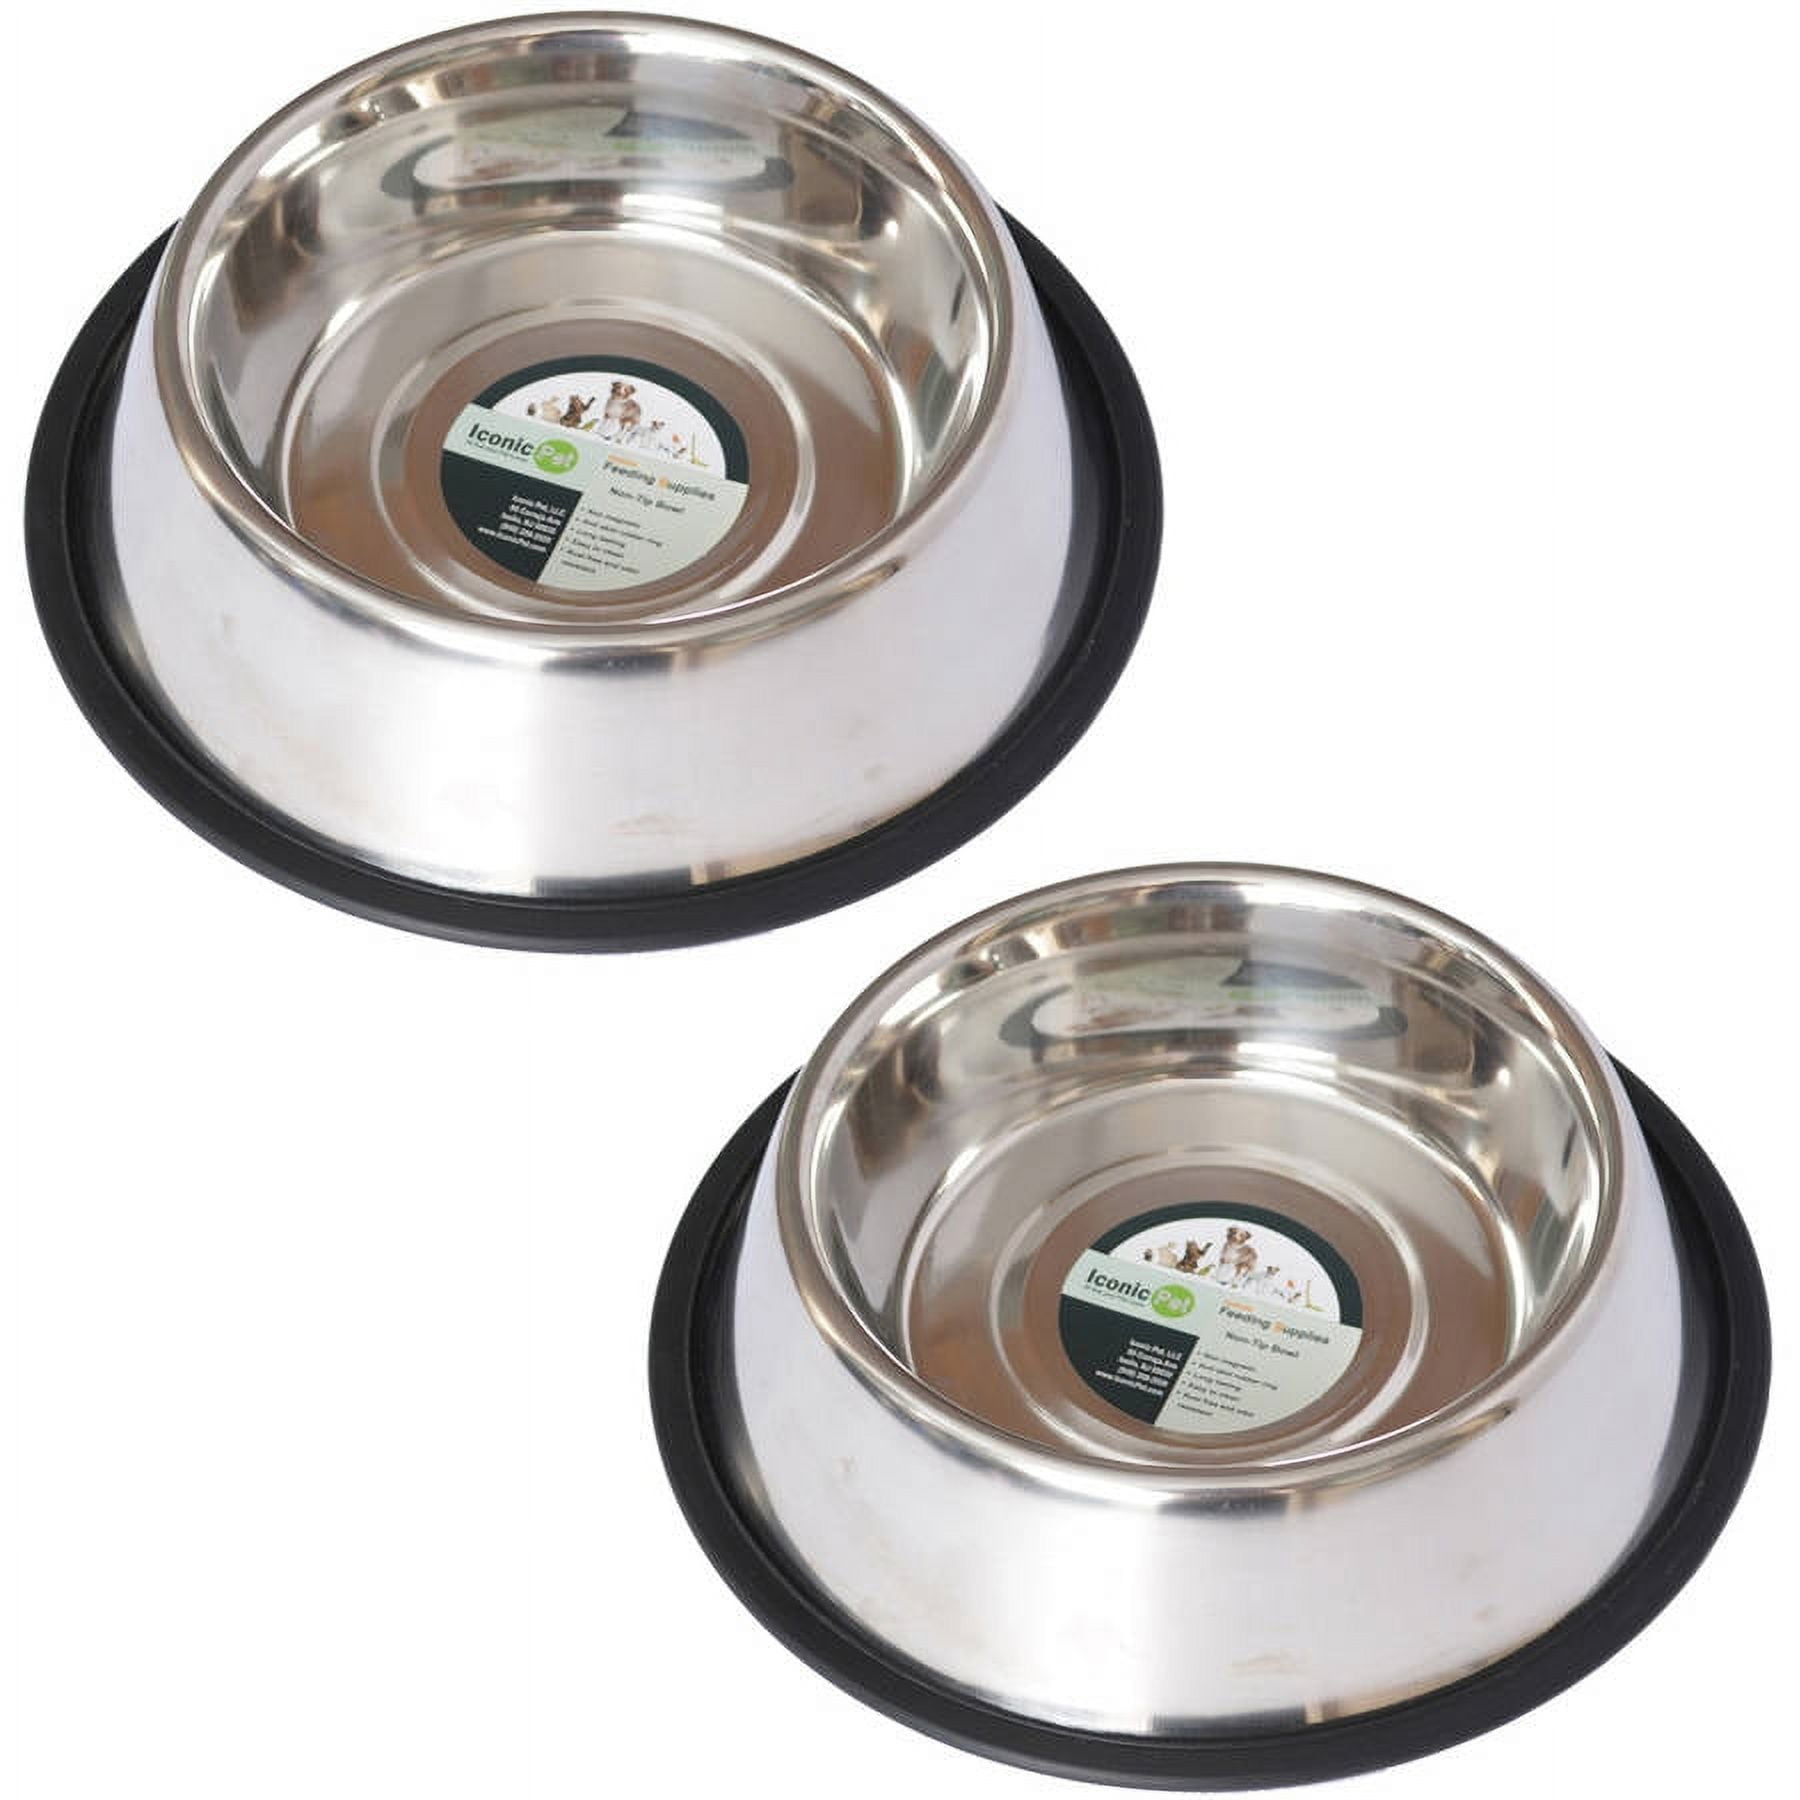 Picture of Iconic Pet 51411 8 oz Stainless Steel Non-skid Pet Bowl for Dog Or Cat - Pack of 2